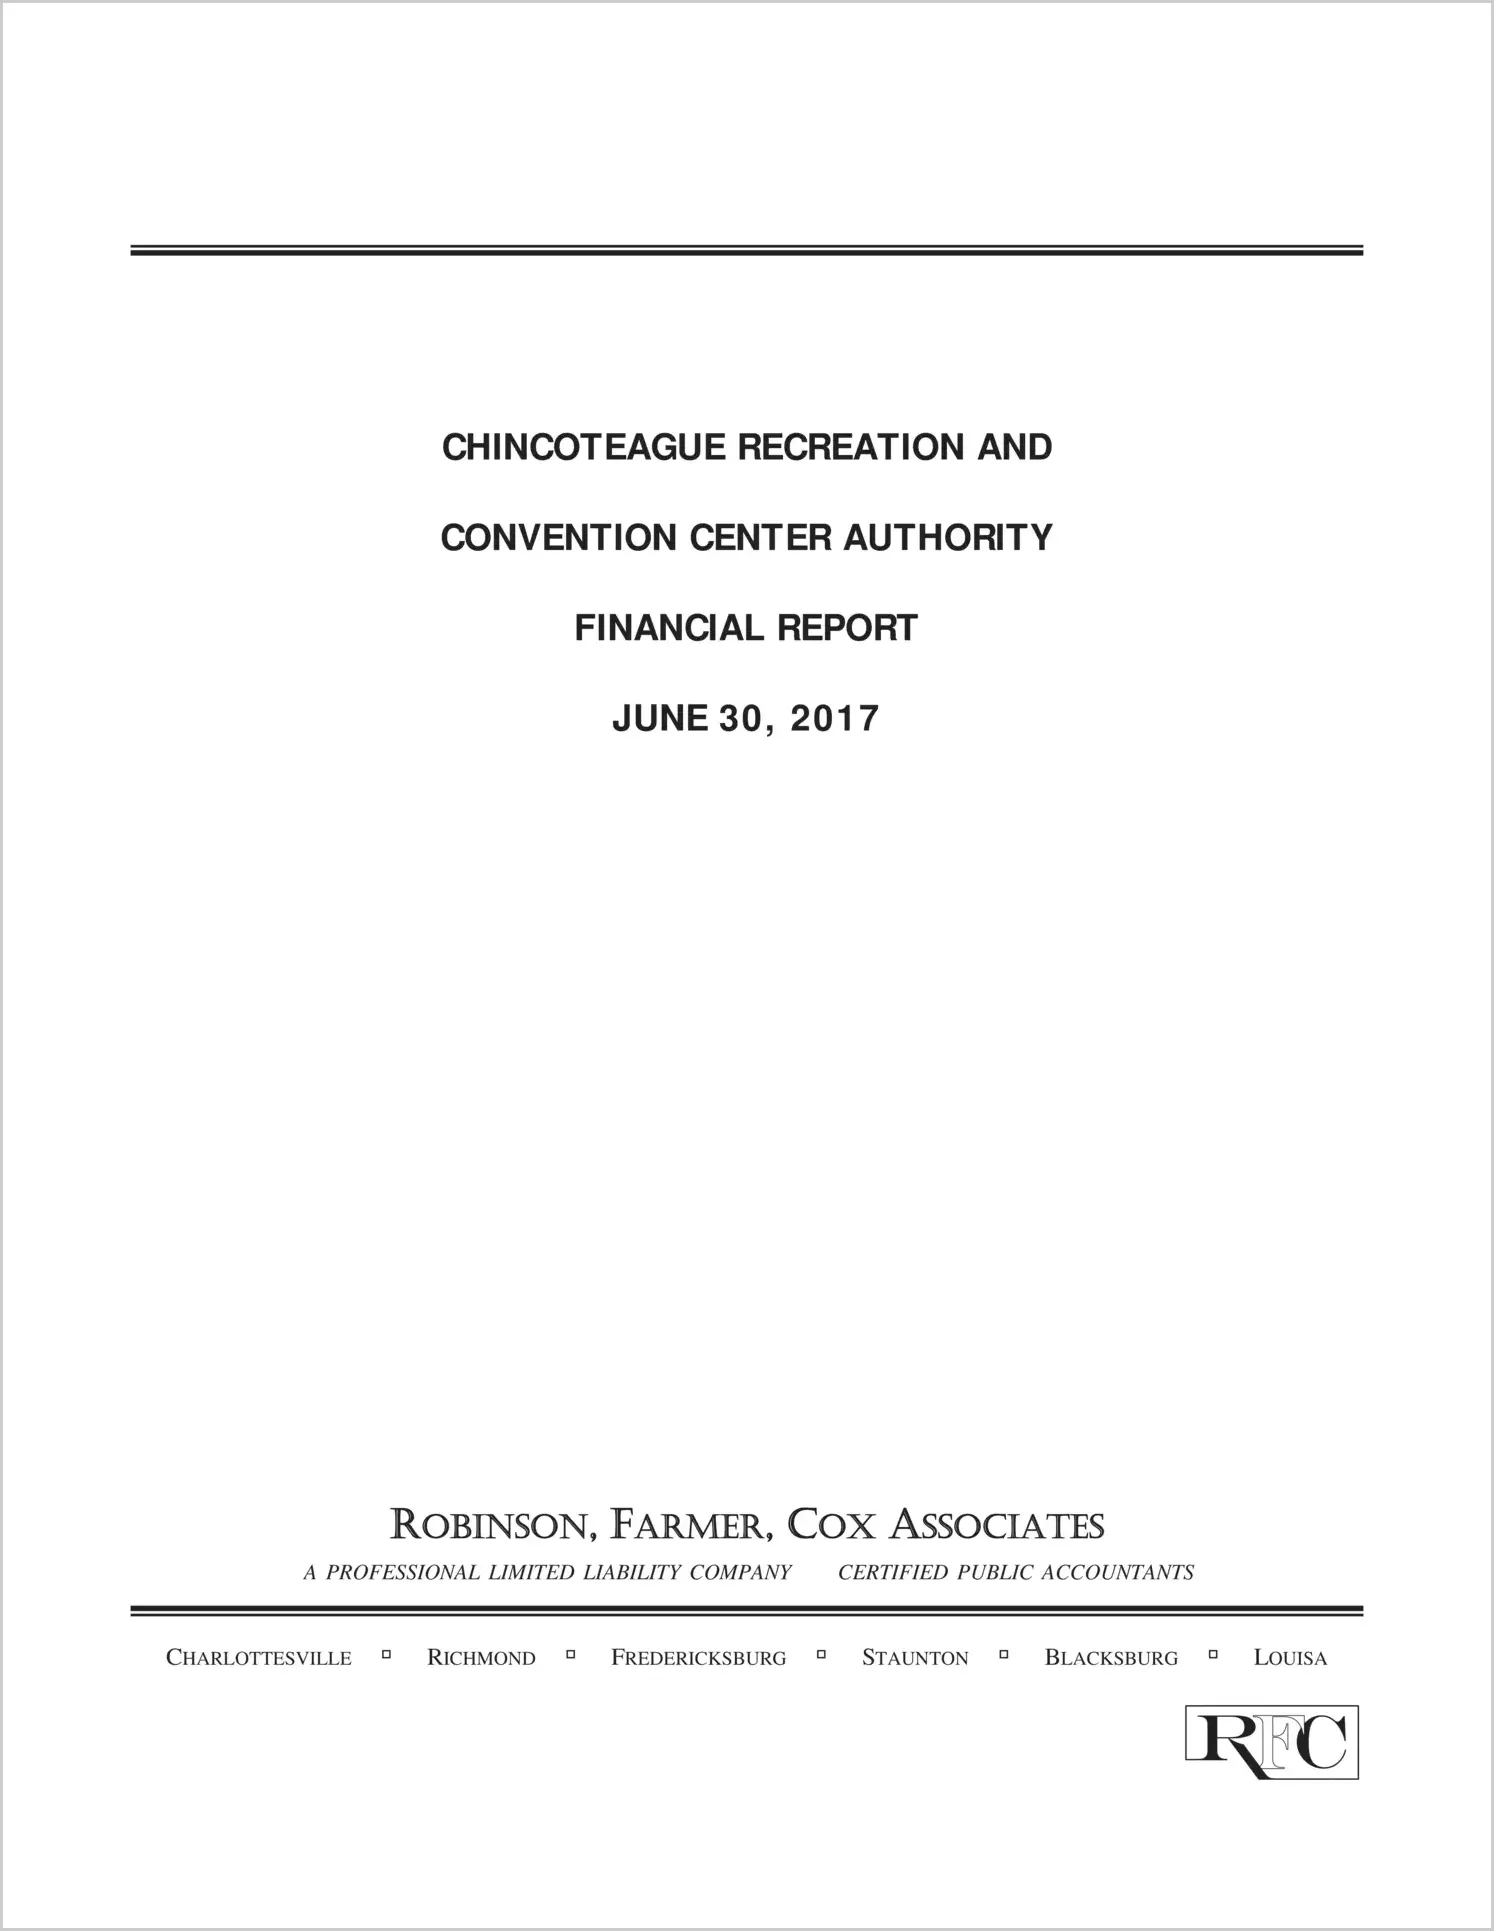 2017 ABC/Other Annual Financial Report  for Chincoteague Recreation and Convention Center Authority